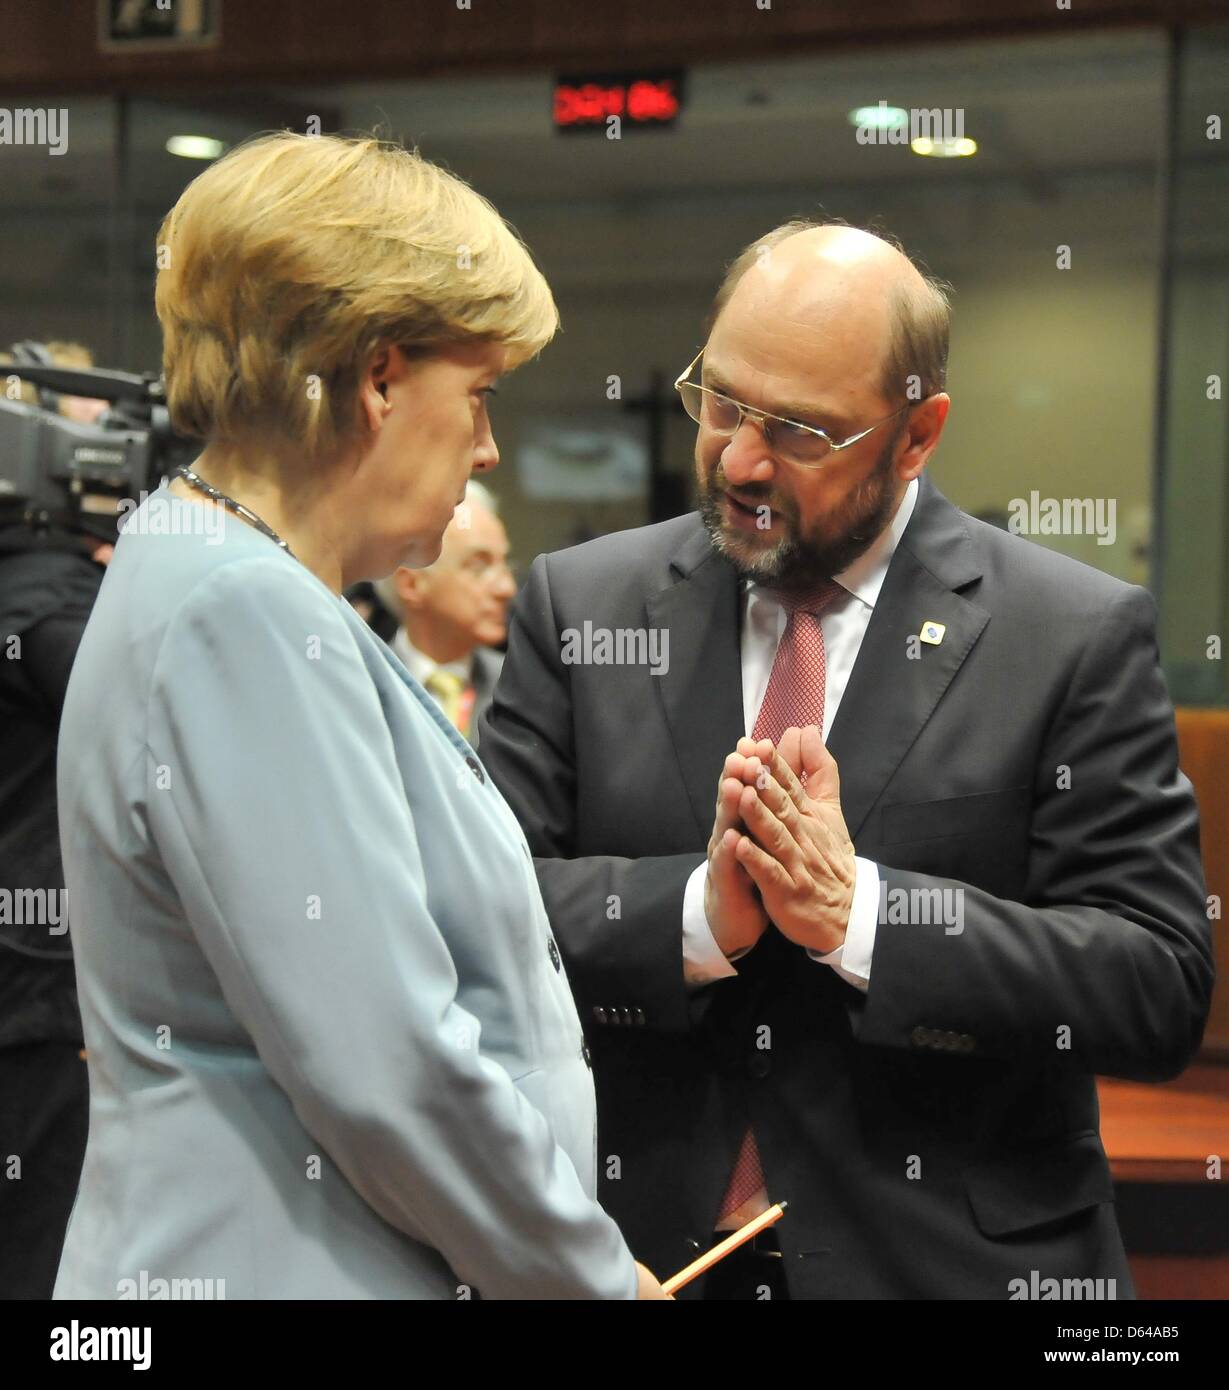 Germany's chancellor Angela Merkel the President of the EU Parliament Martin Schulz (SPD) speak during the EU summit in Brussels, Belgium, 23 May 2012. The heads of states and heads of governments of the 27 EU states have come together to speak about economical growth as a way out of the crisis. Topics discussed will be a possible tax on financial deals as well as eurobonds. Photo: Stock Photo